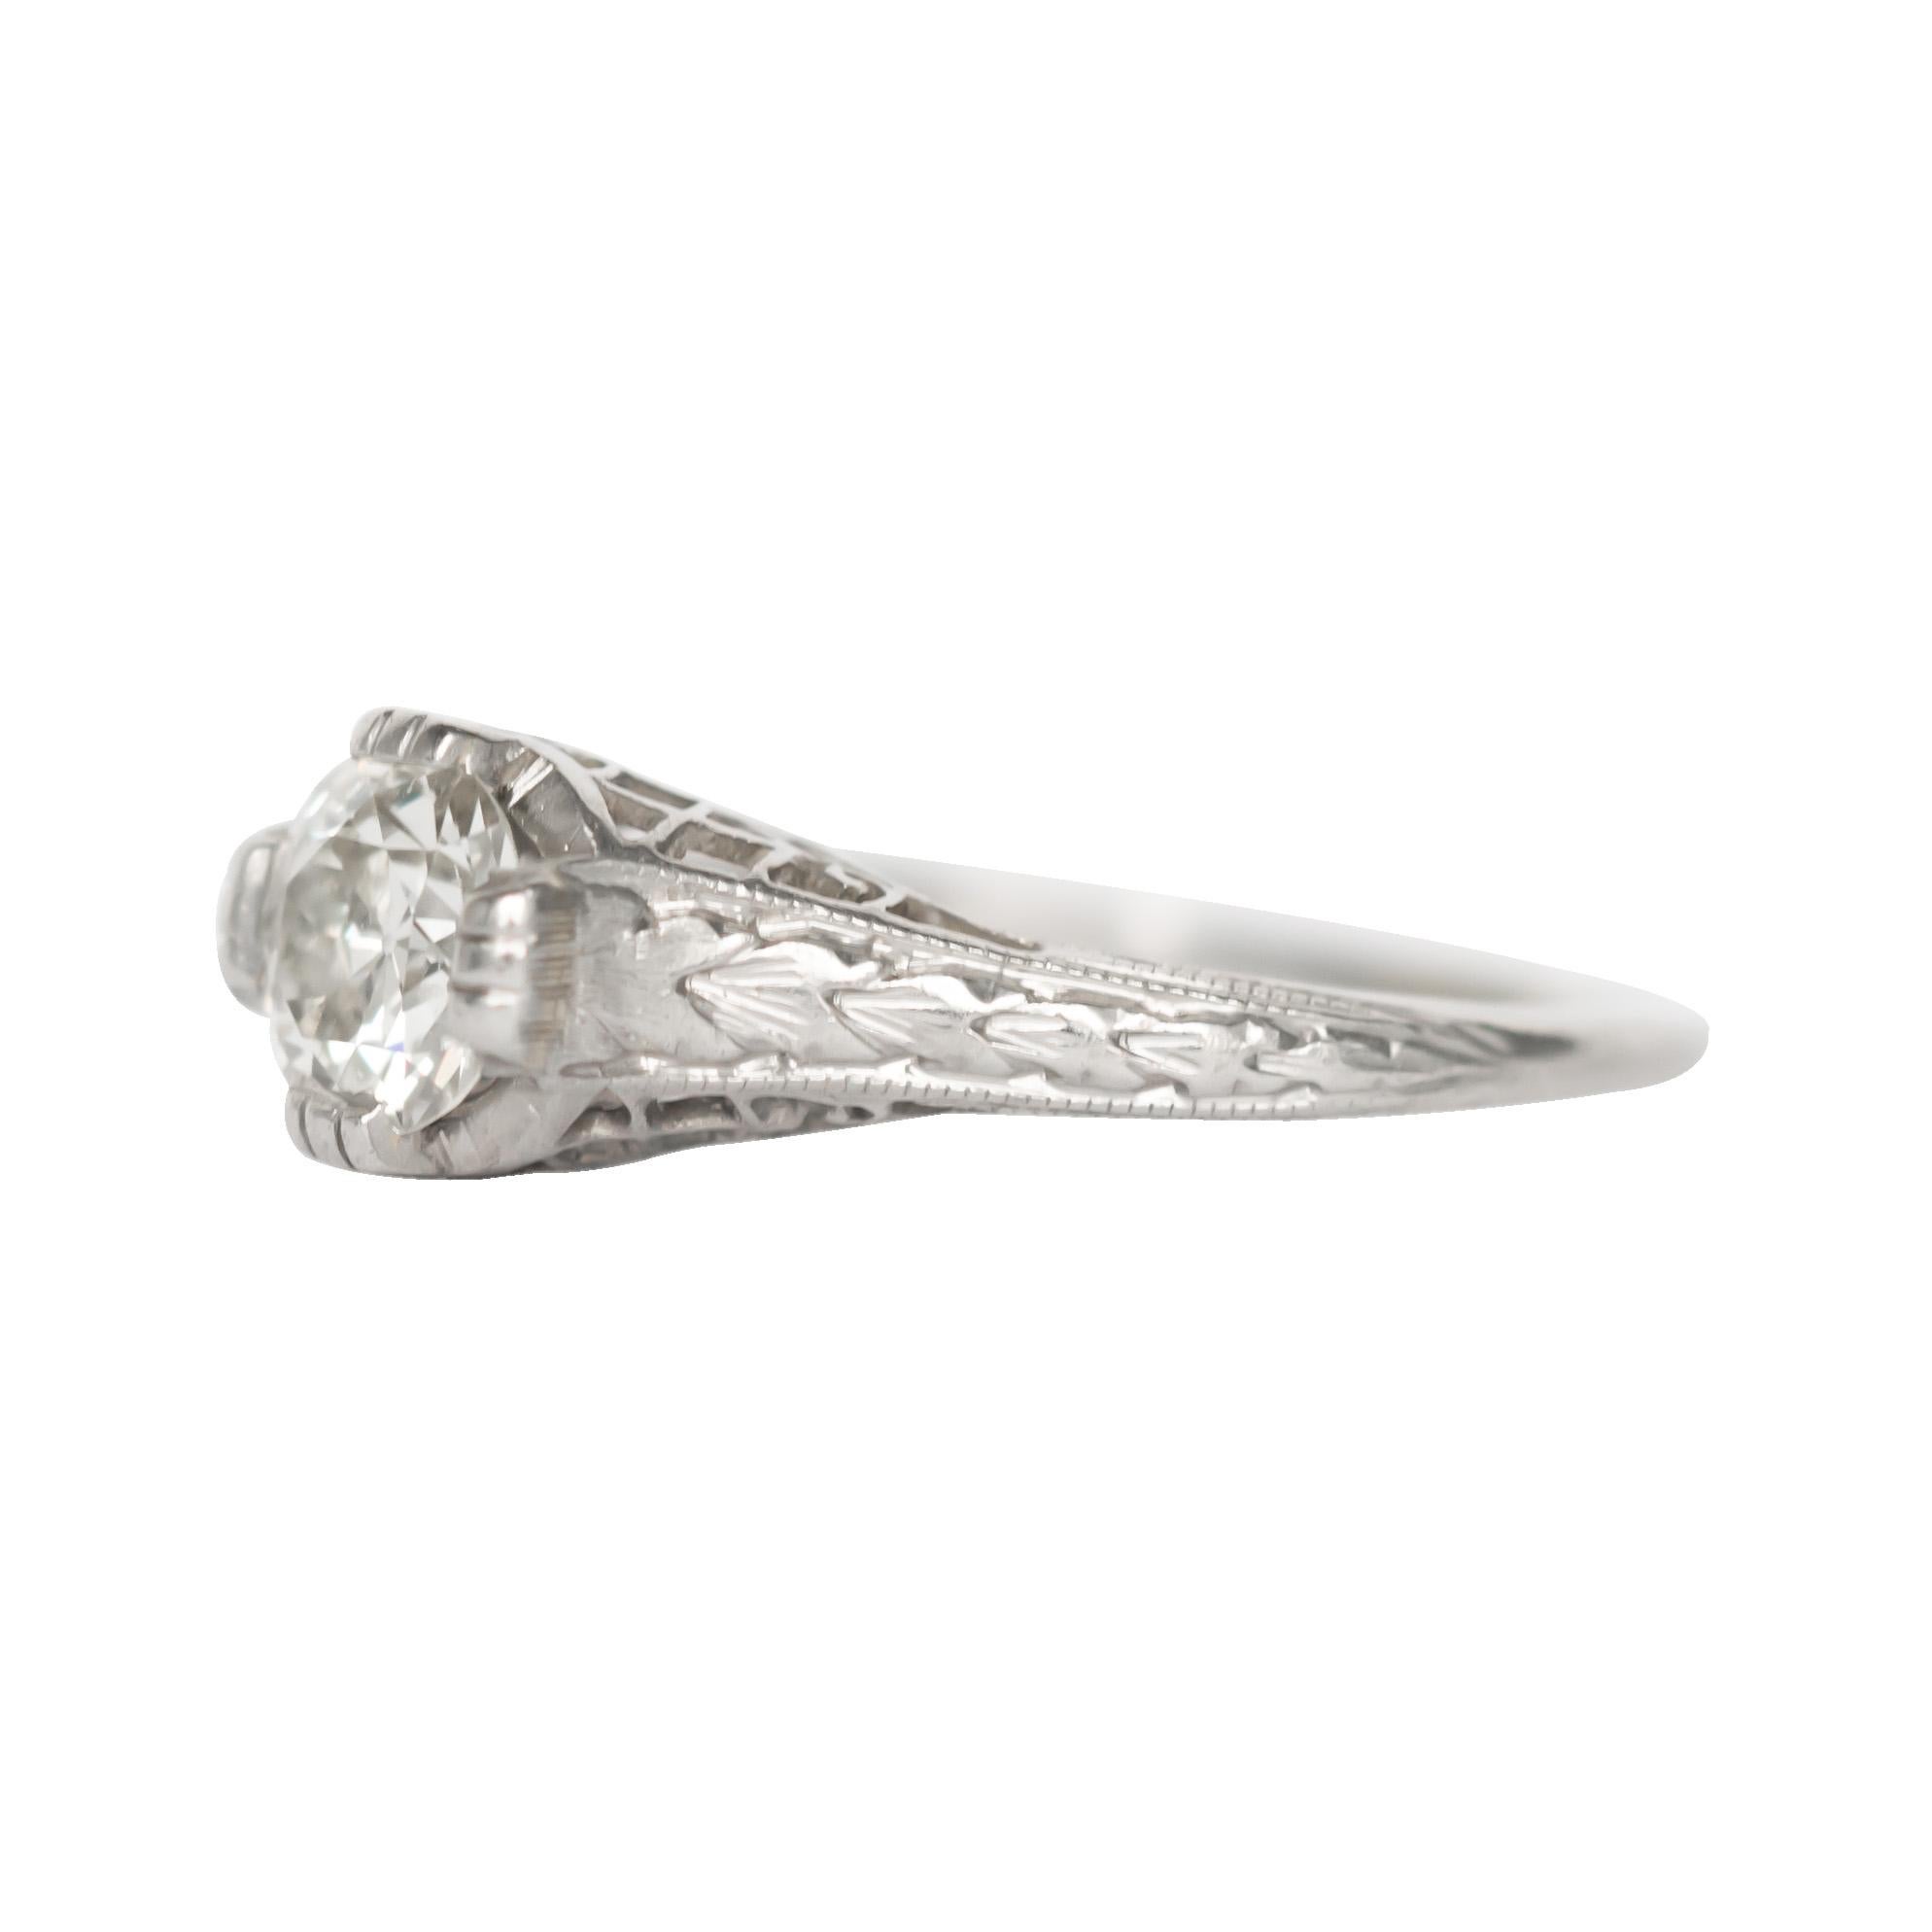 Ring Size: 7
Metal Type: Platinum 
Weight: 2.8 grams

Center Diamond Details
Shape: Old European Brilliant
Carat Weight: .70 carat
Color: J
Clarity: VS1

Finger to Top of Stone Measurement: 6.55mm